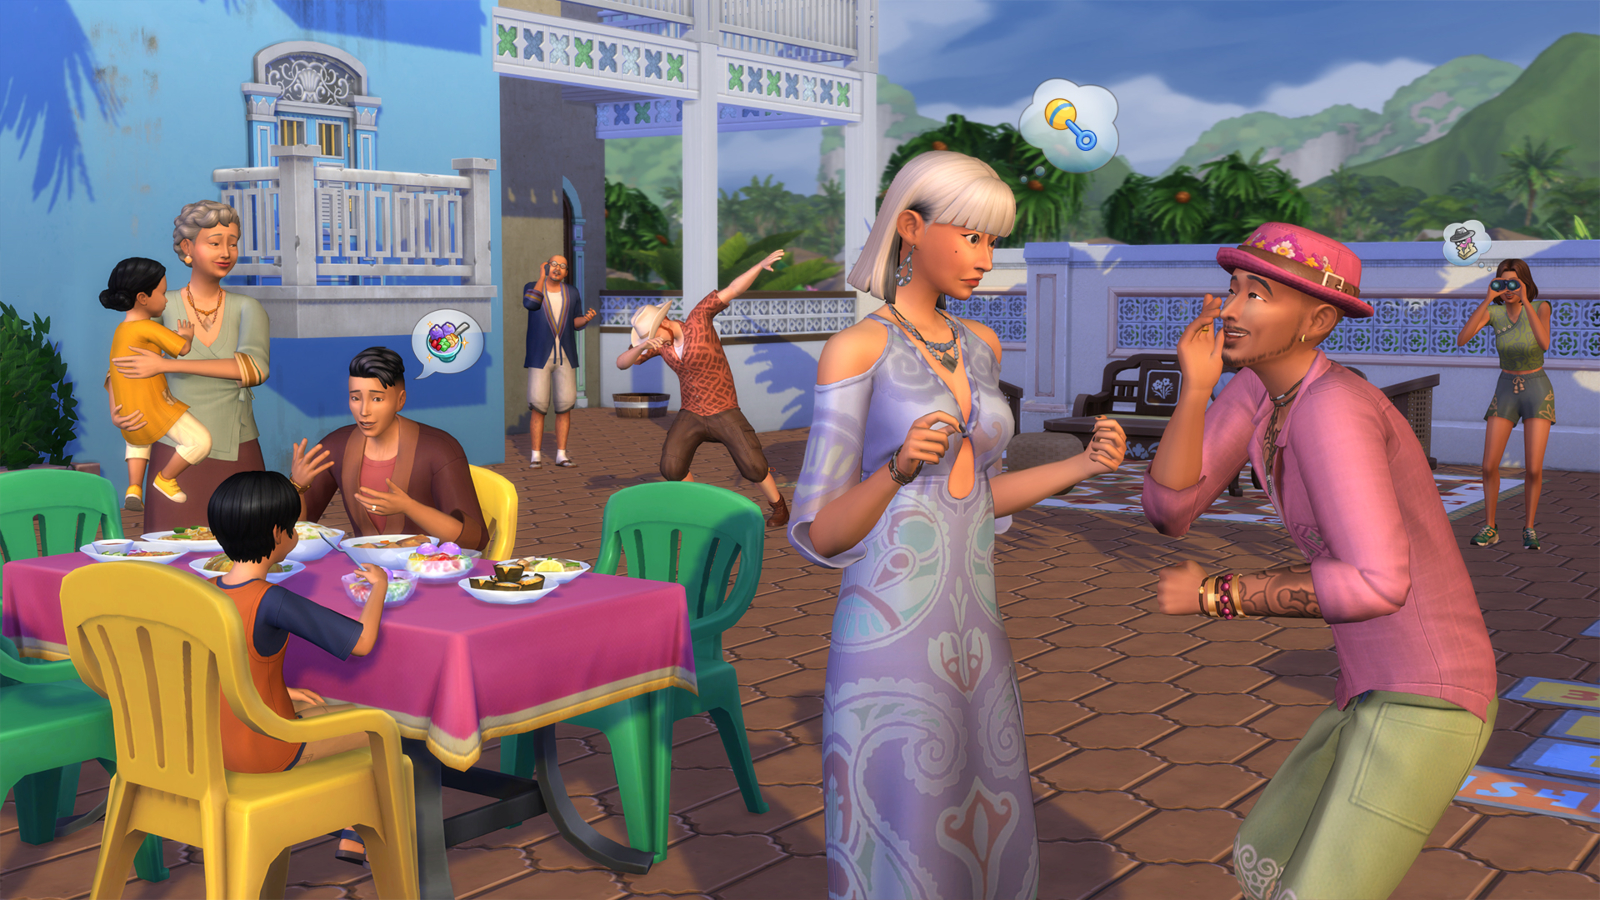 Sims 4 players furious at 'gift' for OG players as game goes free-to-play -  Dexerto